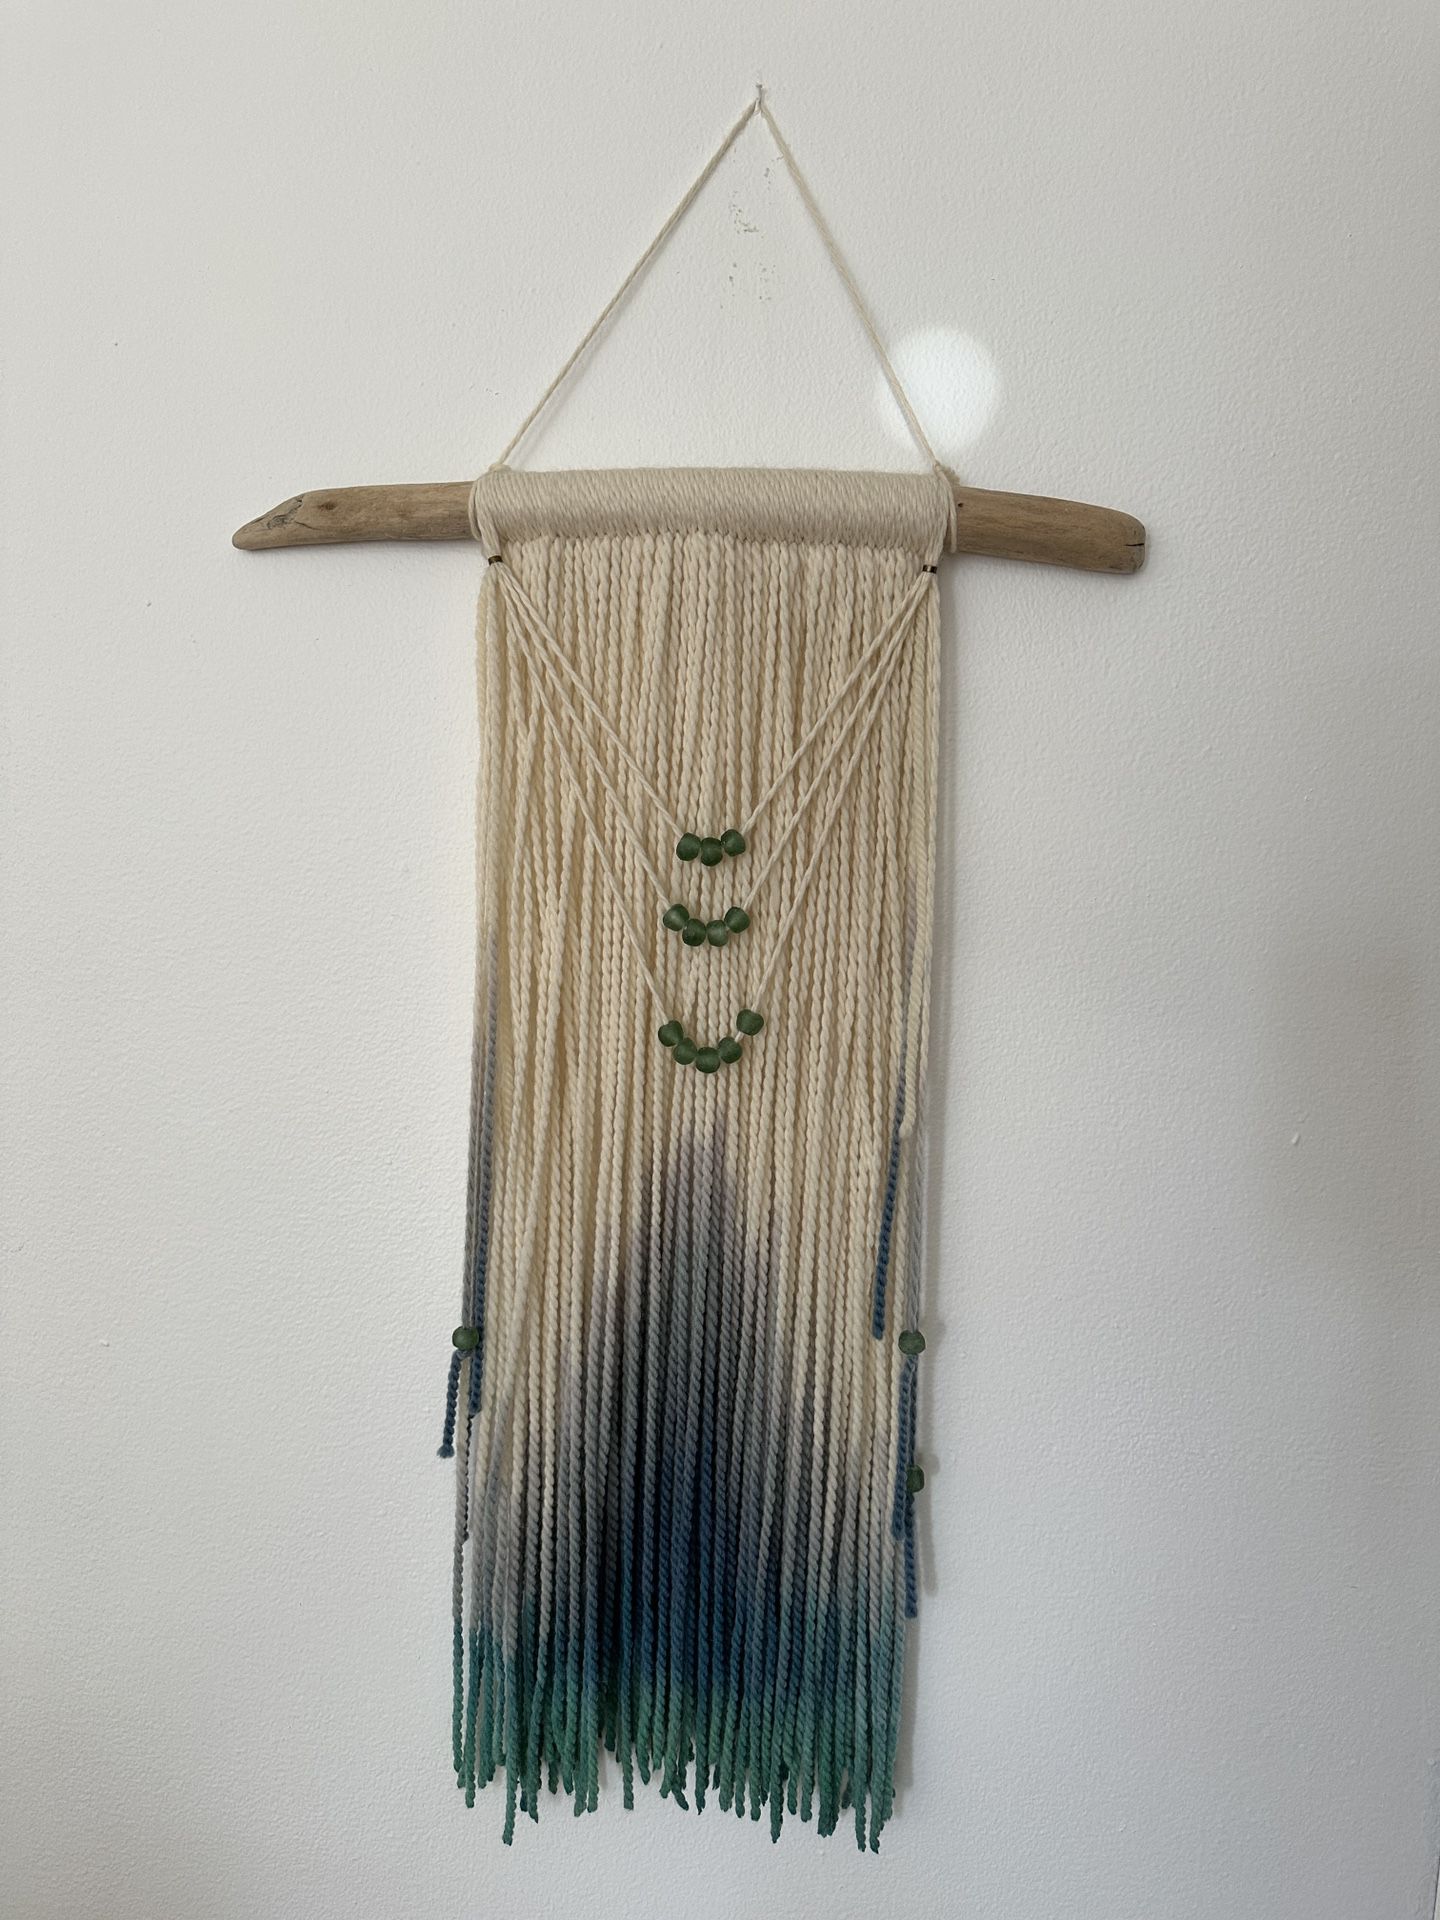 Textile wall hanging